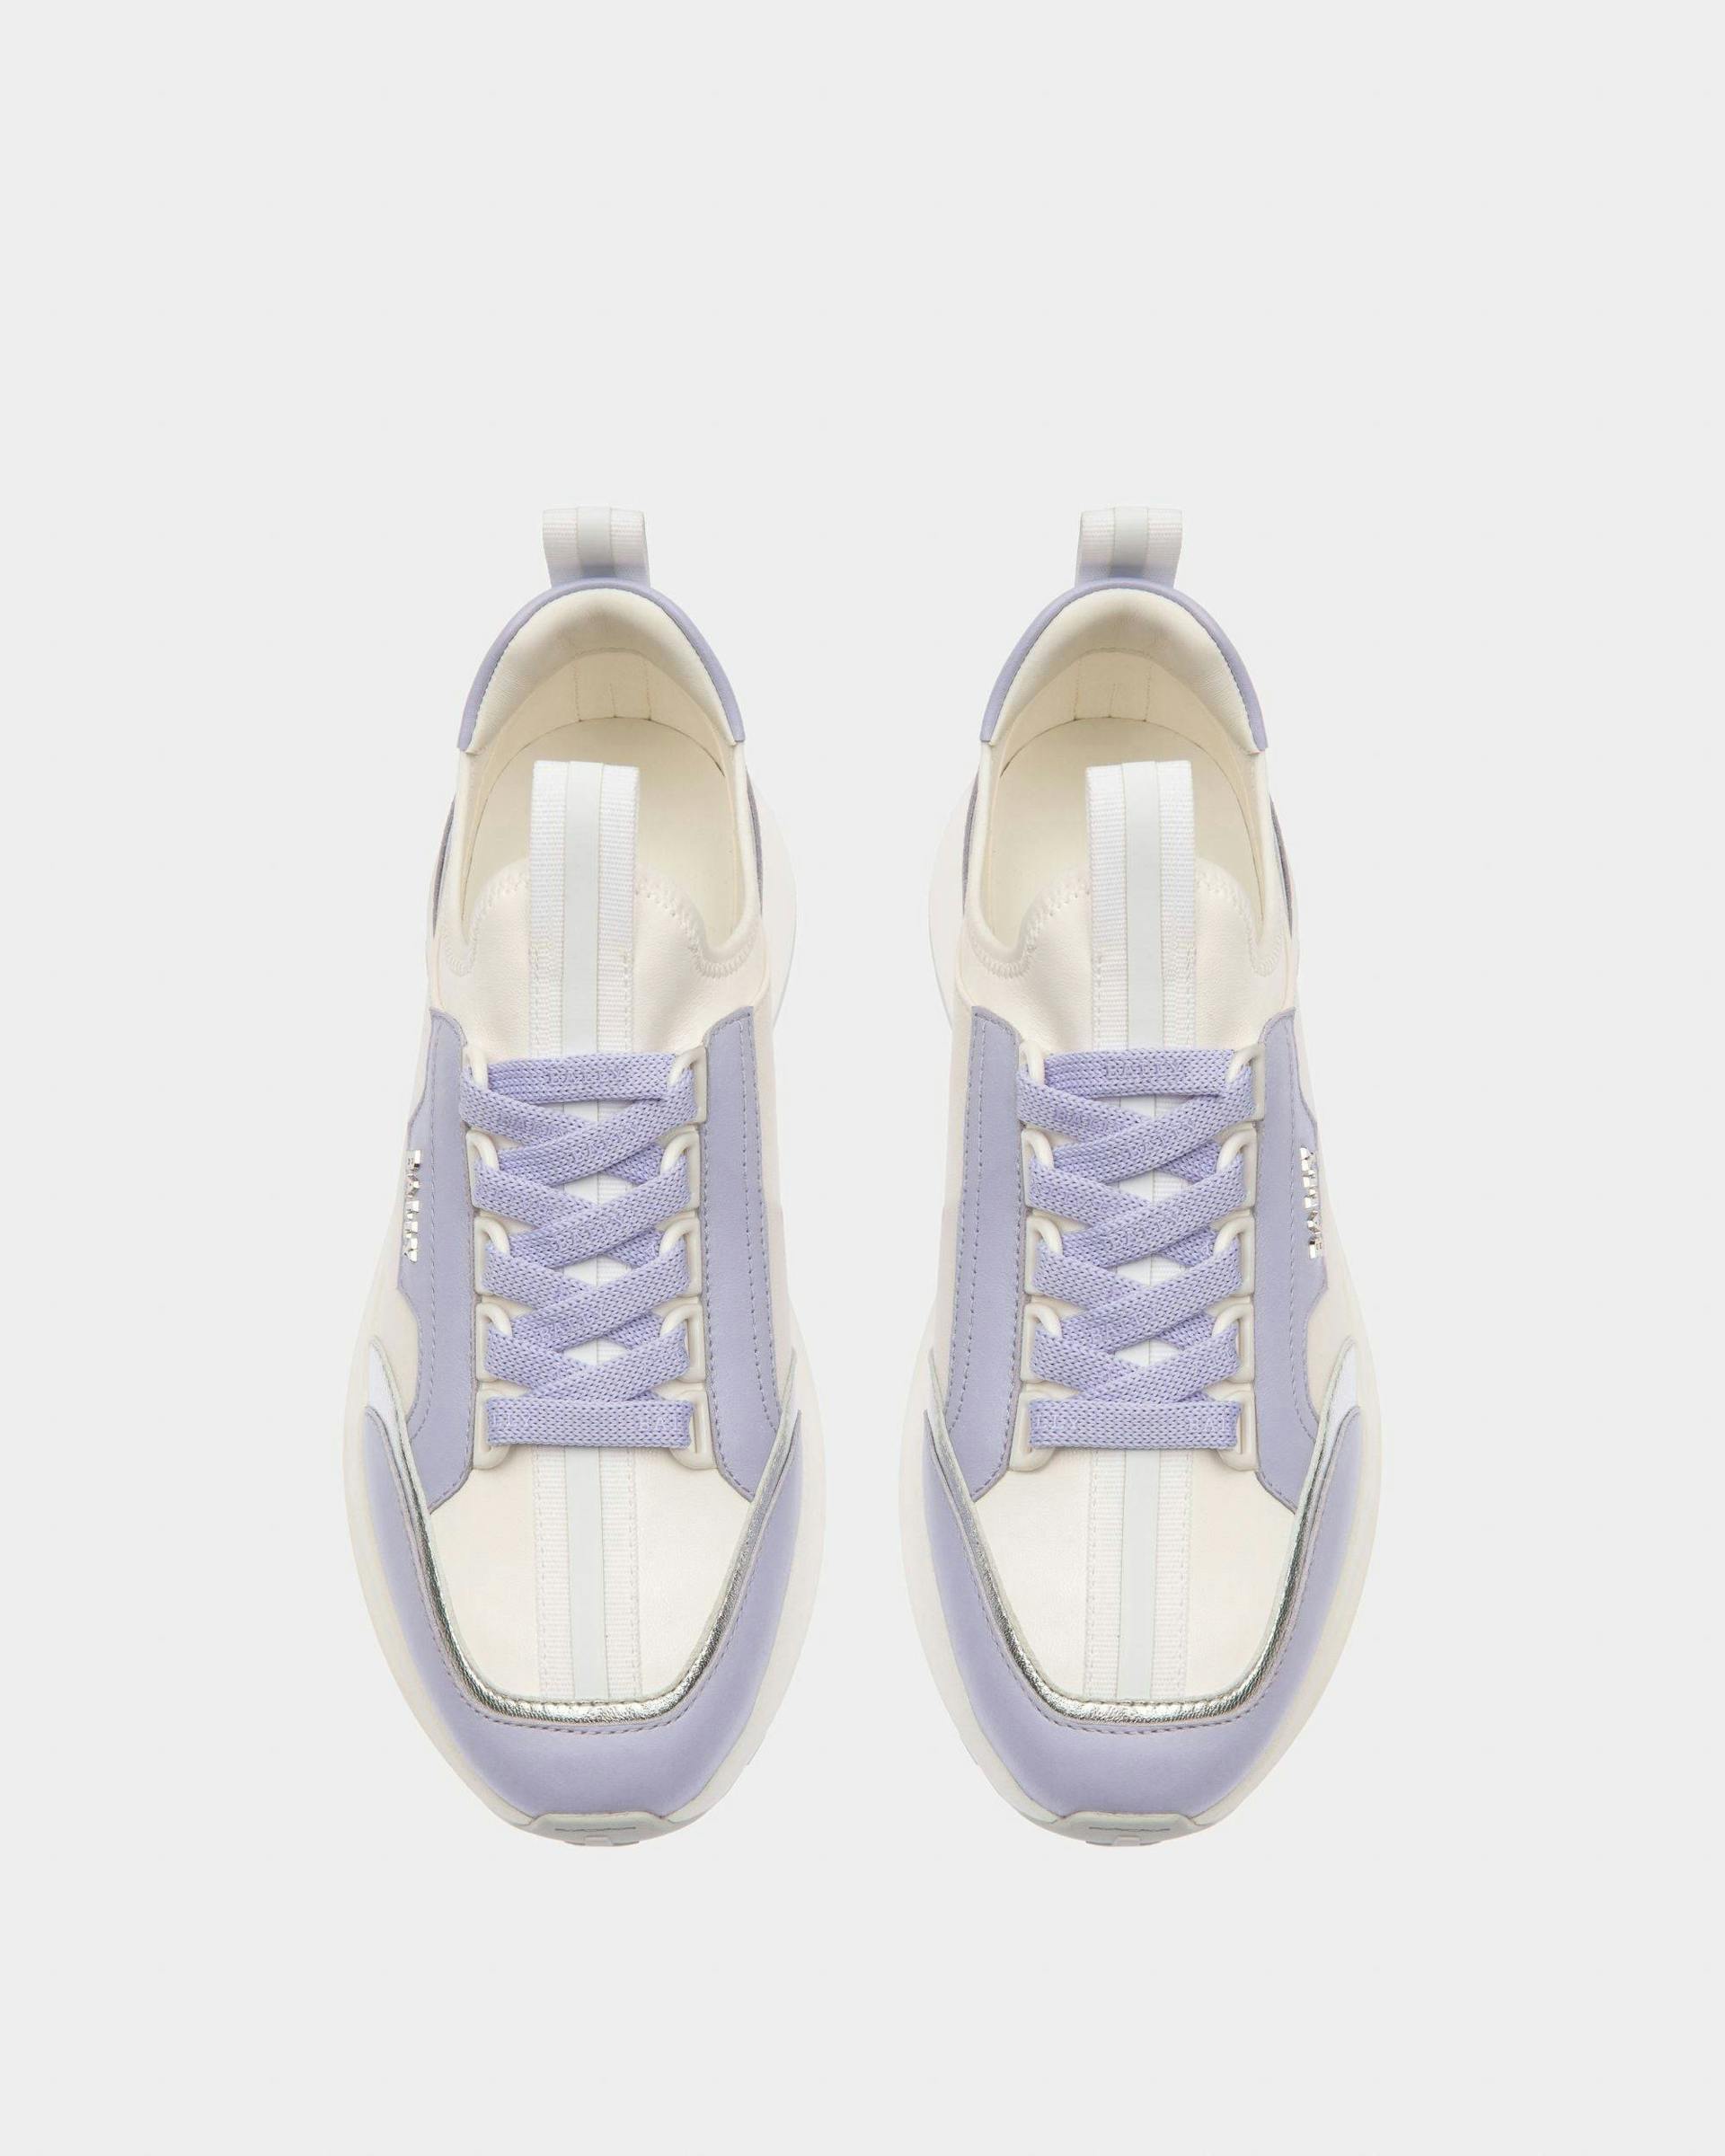 Deven Leather Sneakers In White & Lilac - Women's - Bally - 03